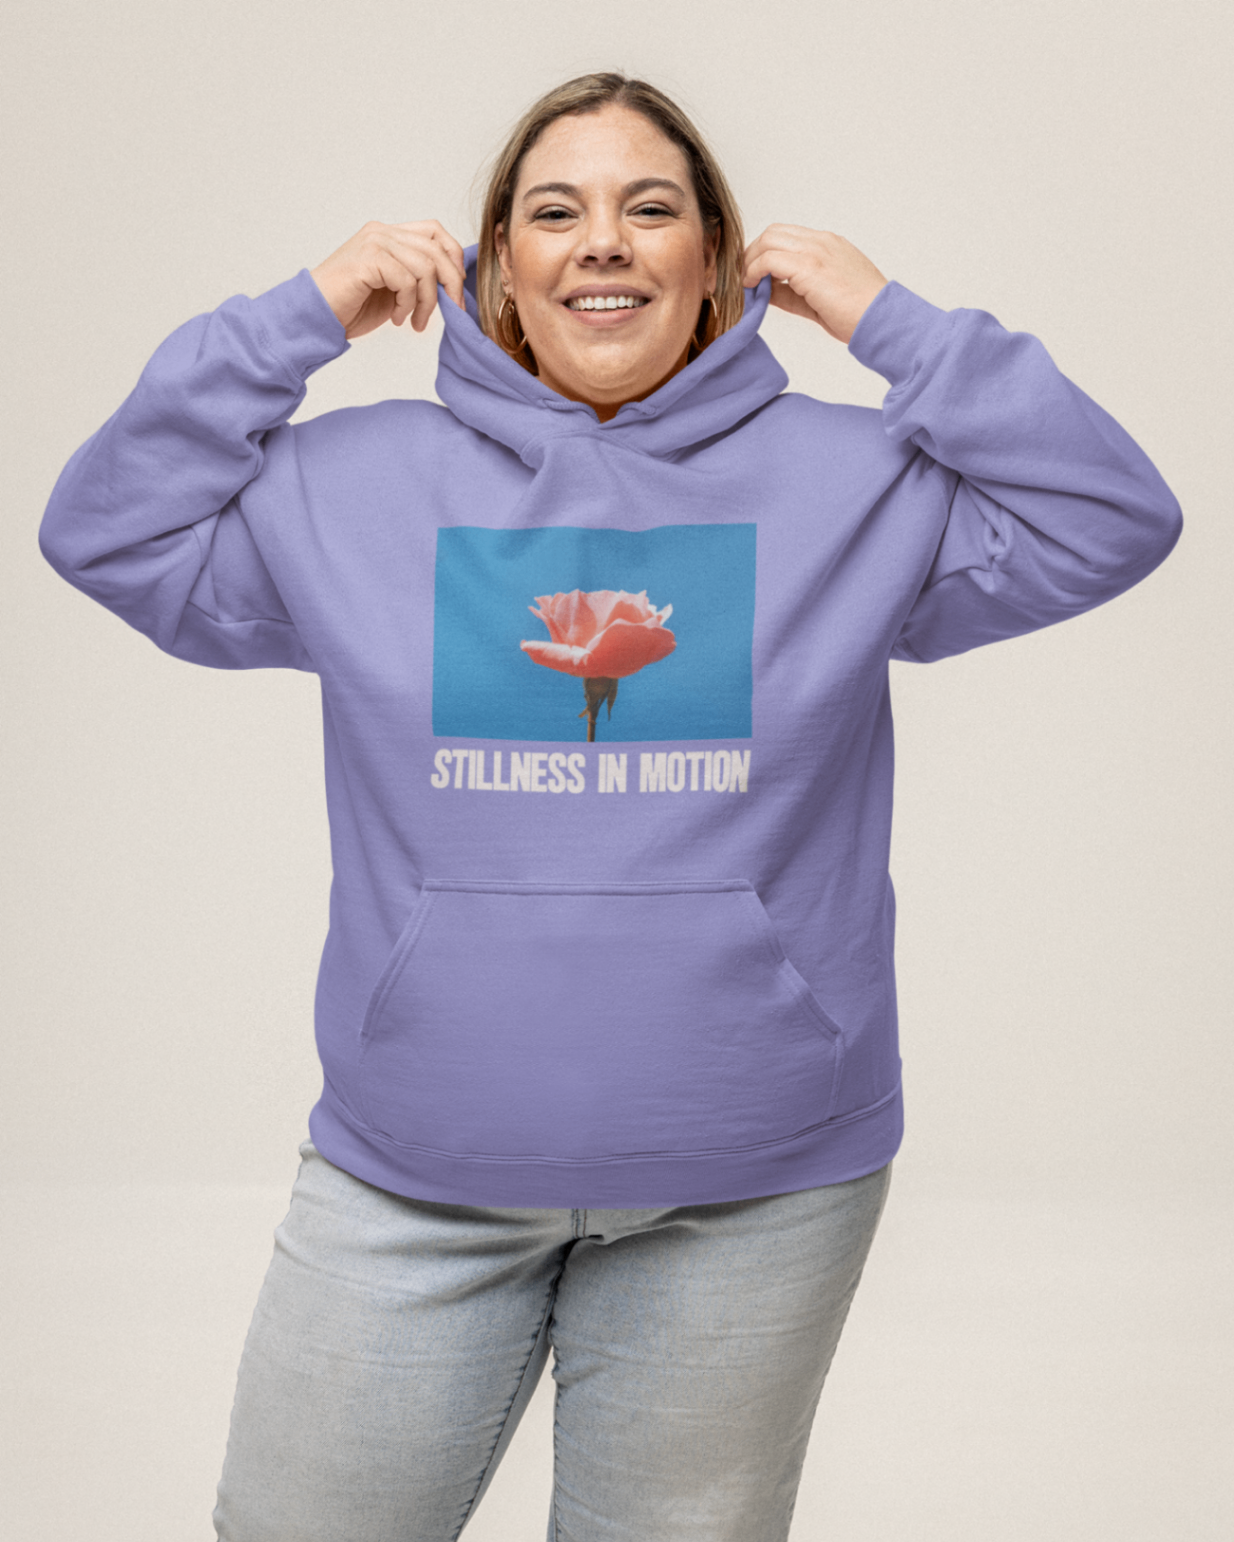 a woman wearing a violet hoodie with stillness in motion written in text under a picture of a pink flower over a sky blue backround